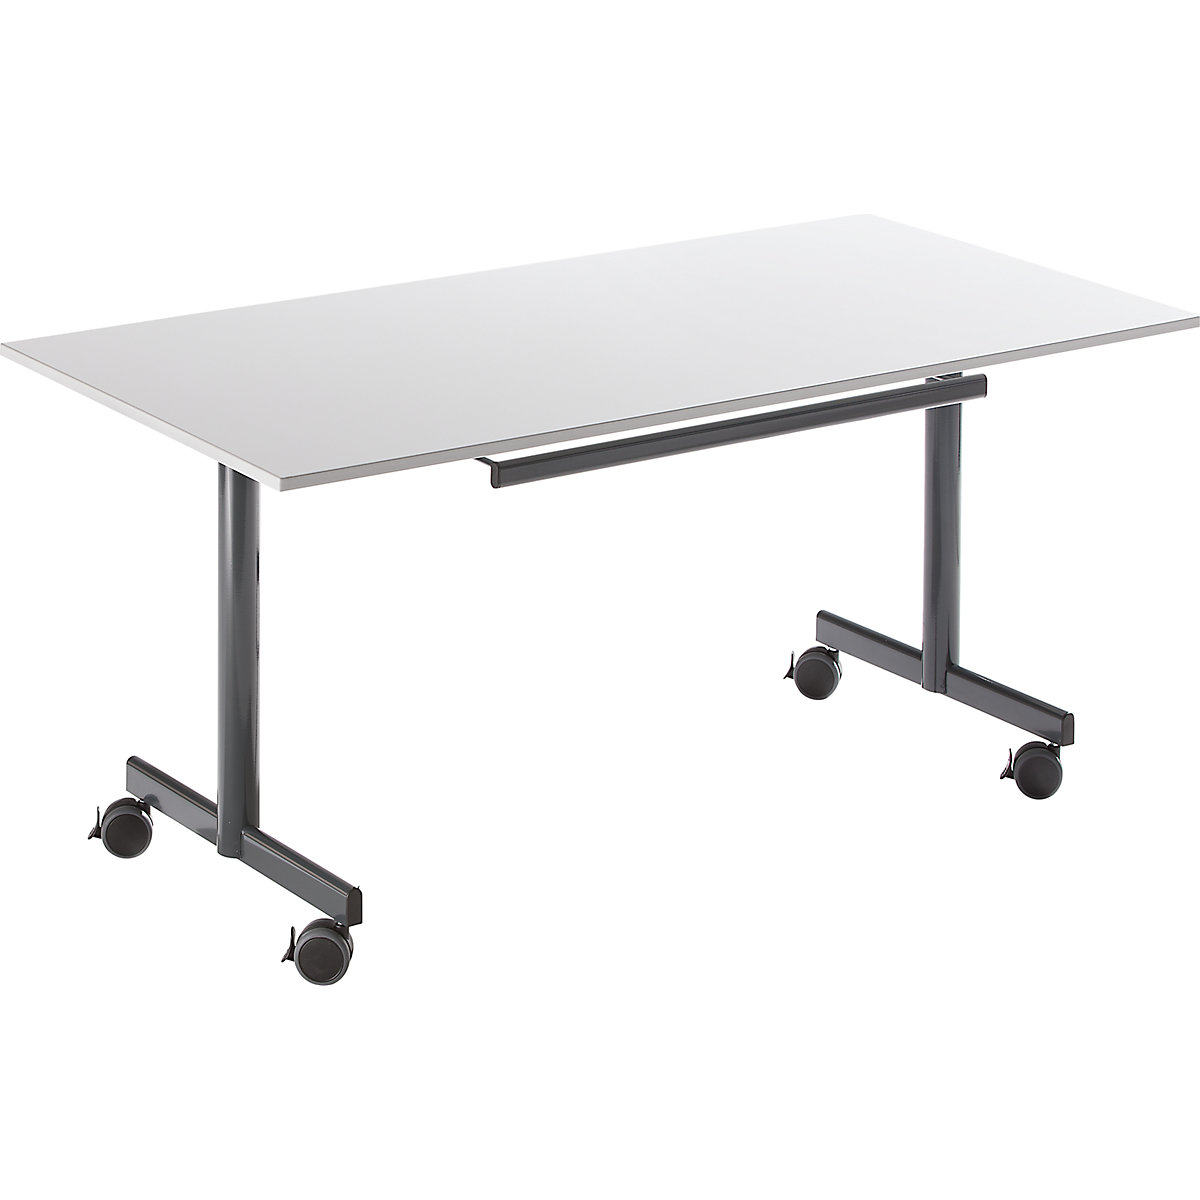 Table with folding top, mobile, HxWxD 720 x 1600 x 800 mm, grey-3